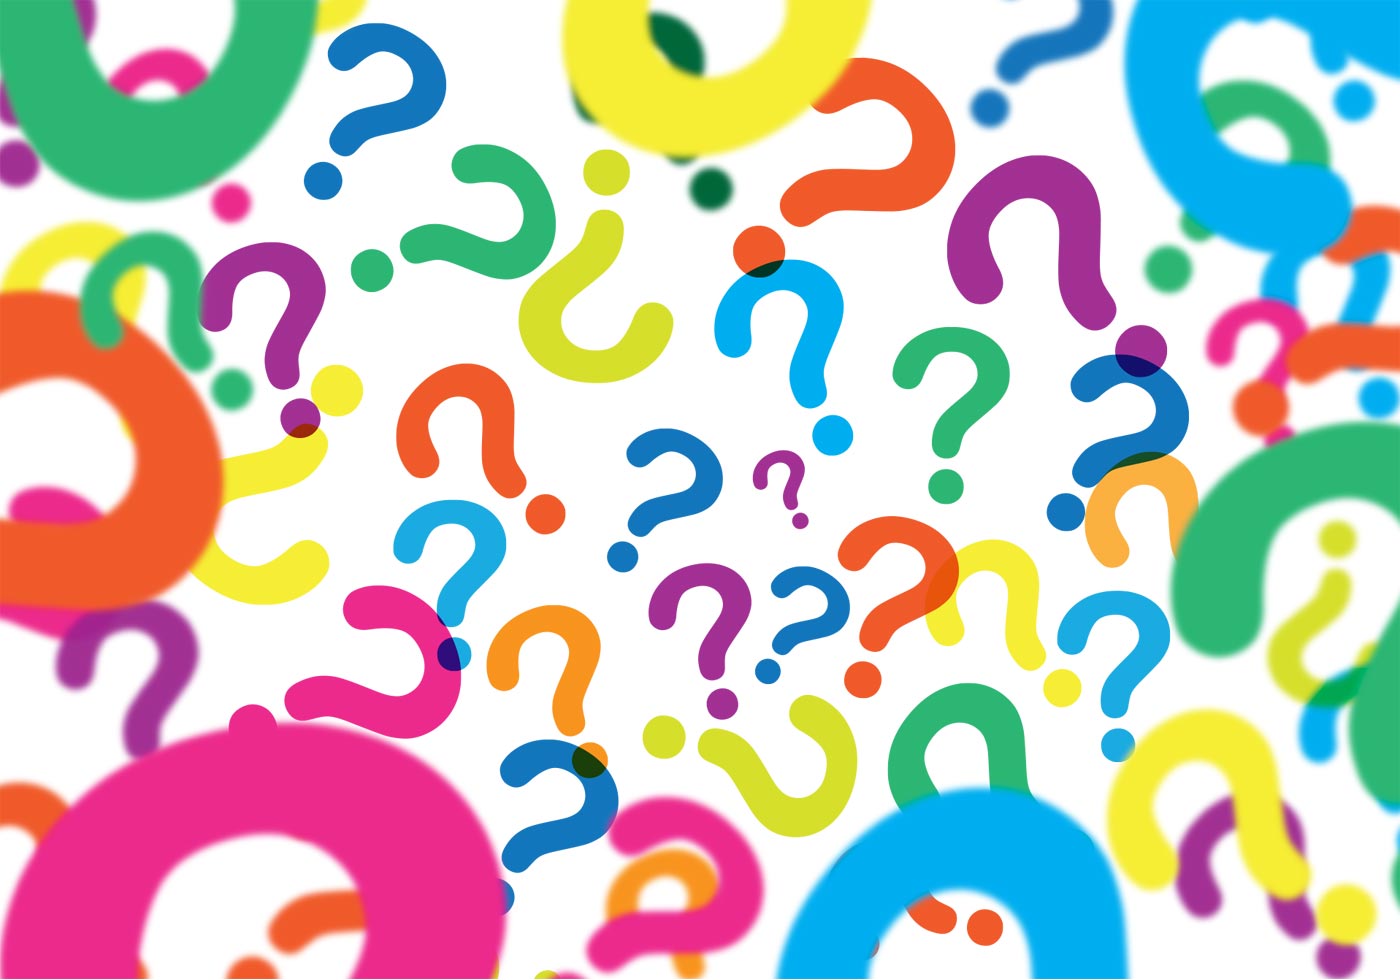 Question Mark Background Vector - Download Free Vector Art, Stock